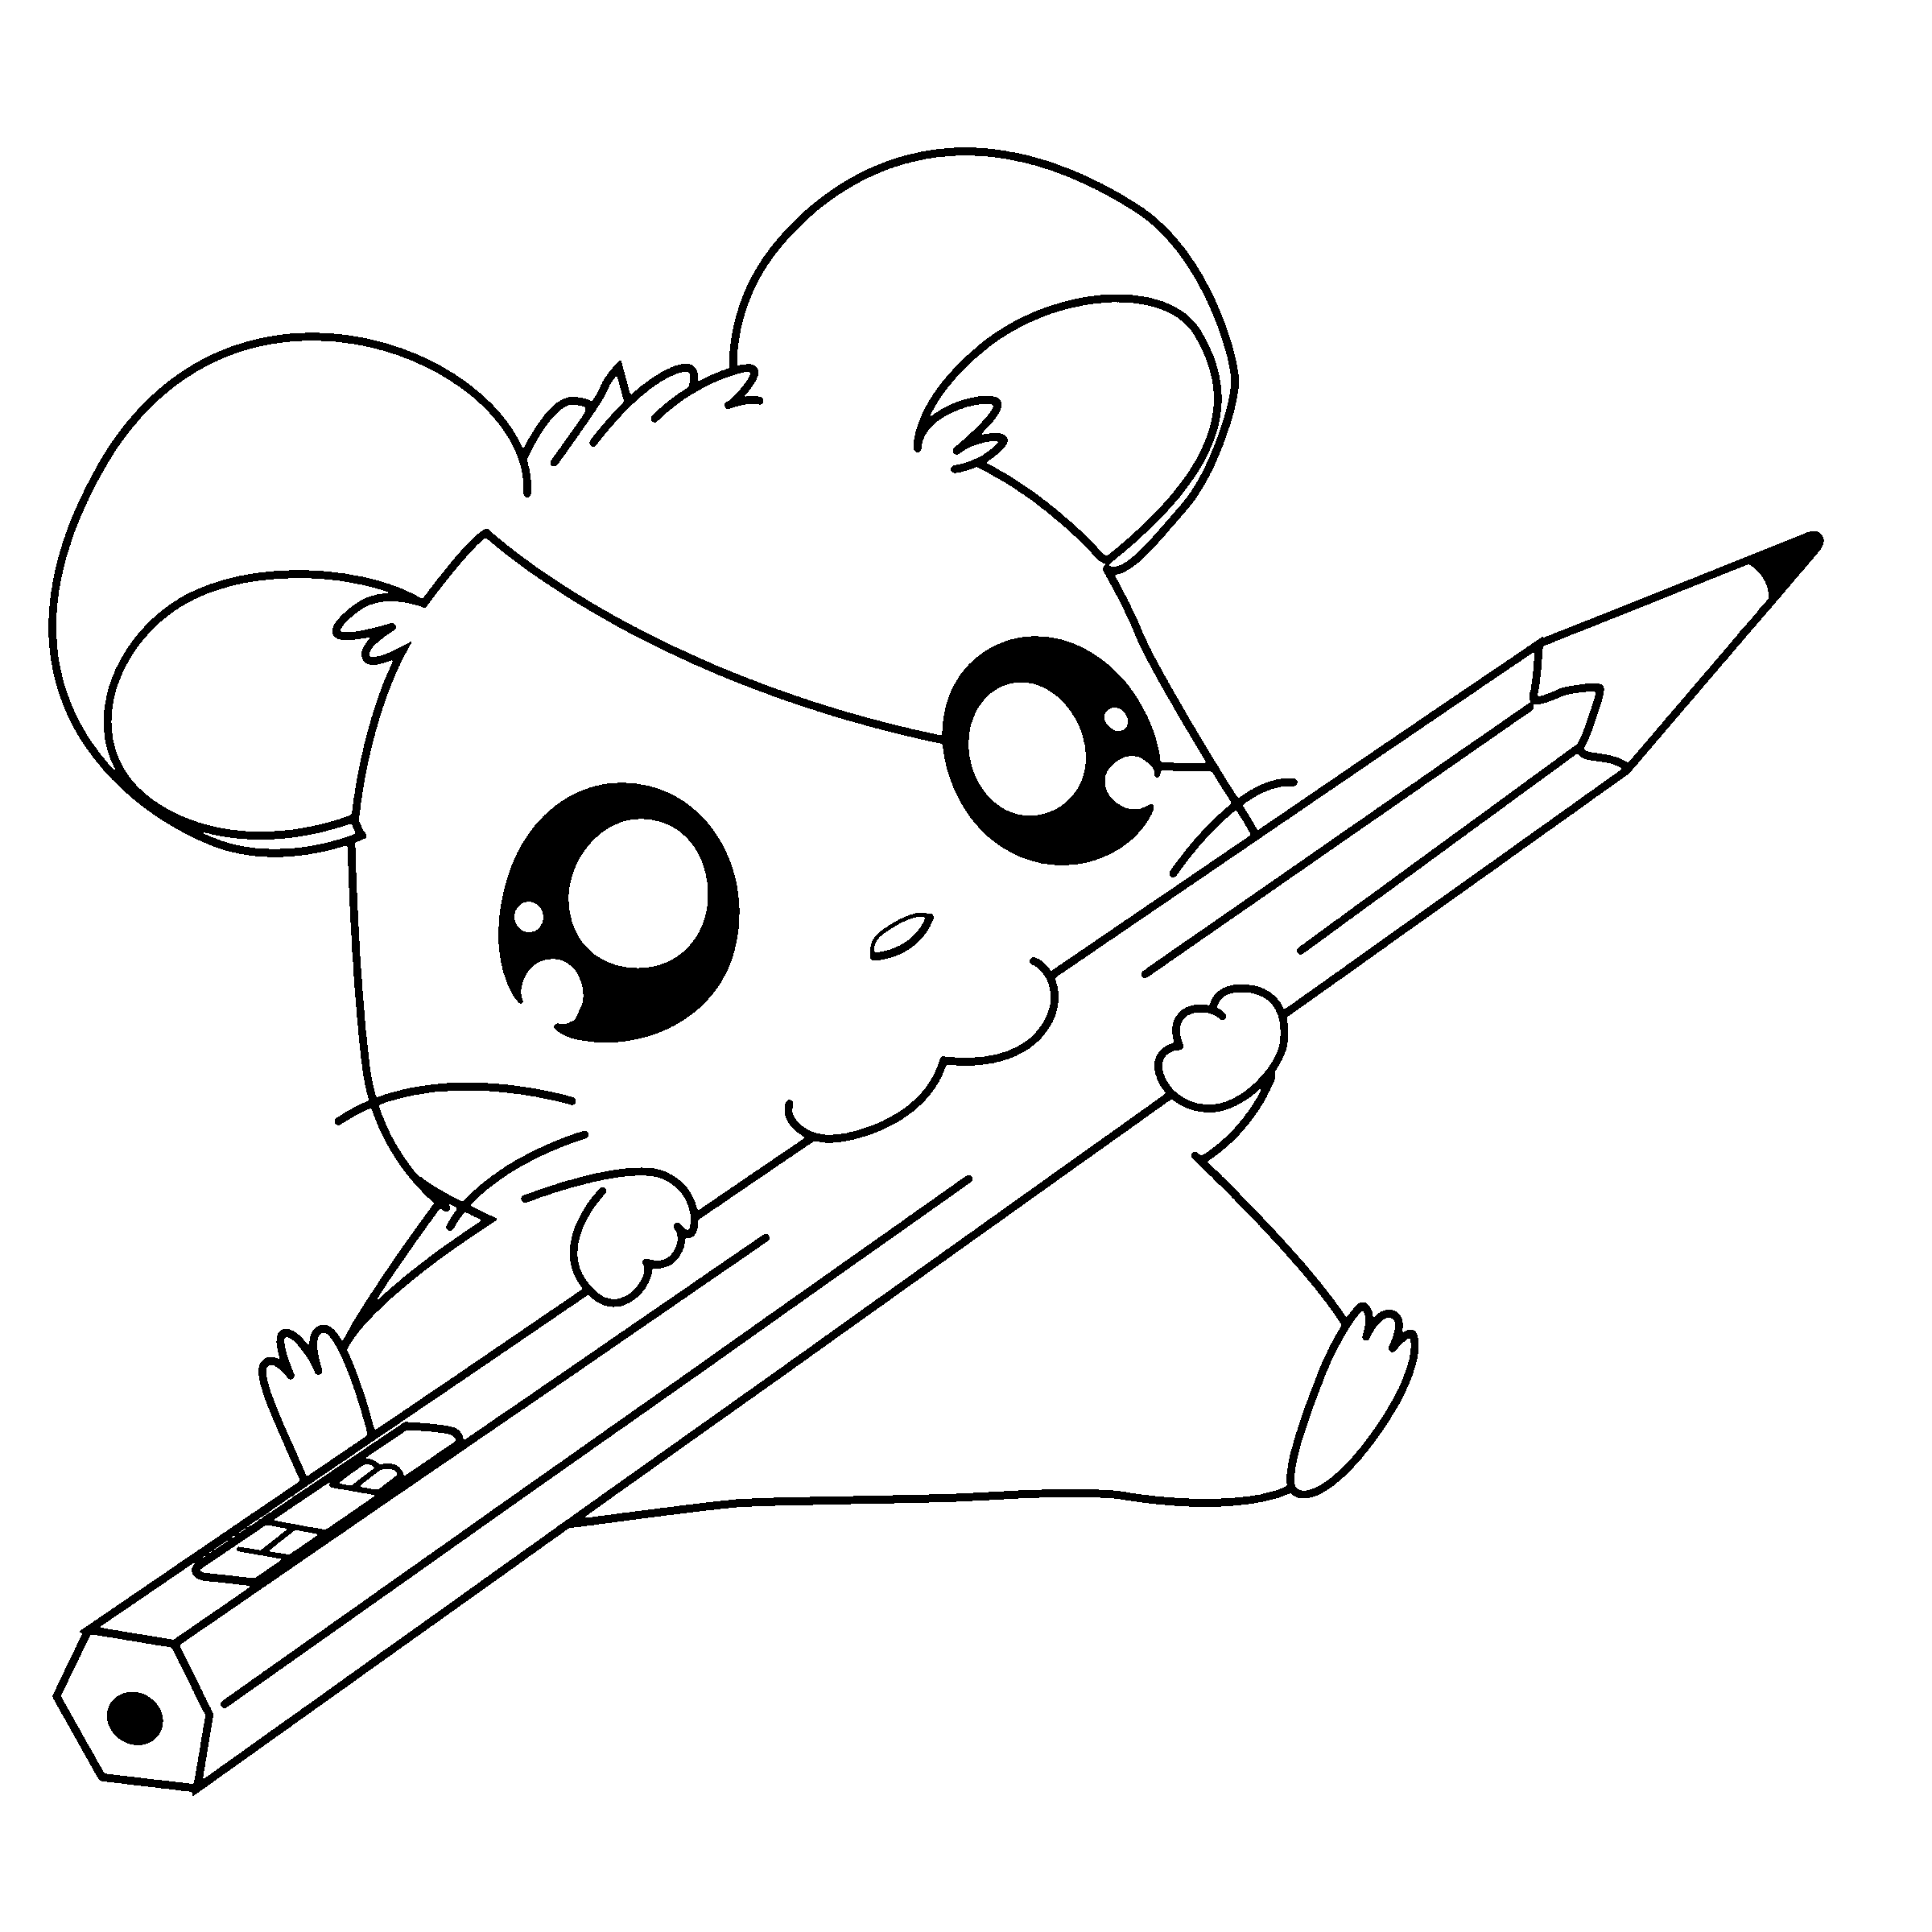 Coloring Pictures Of Cute Animals   Coloring Pages For Kids And ...